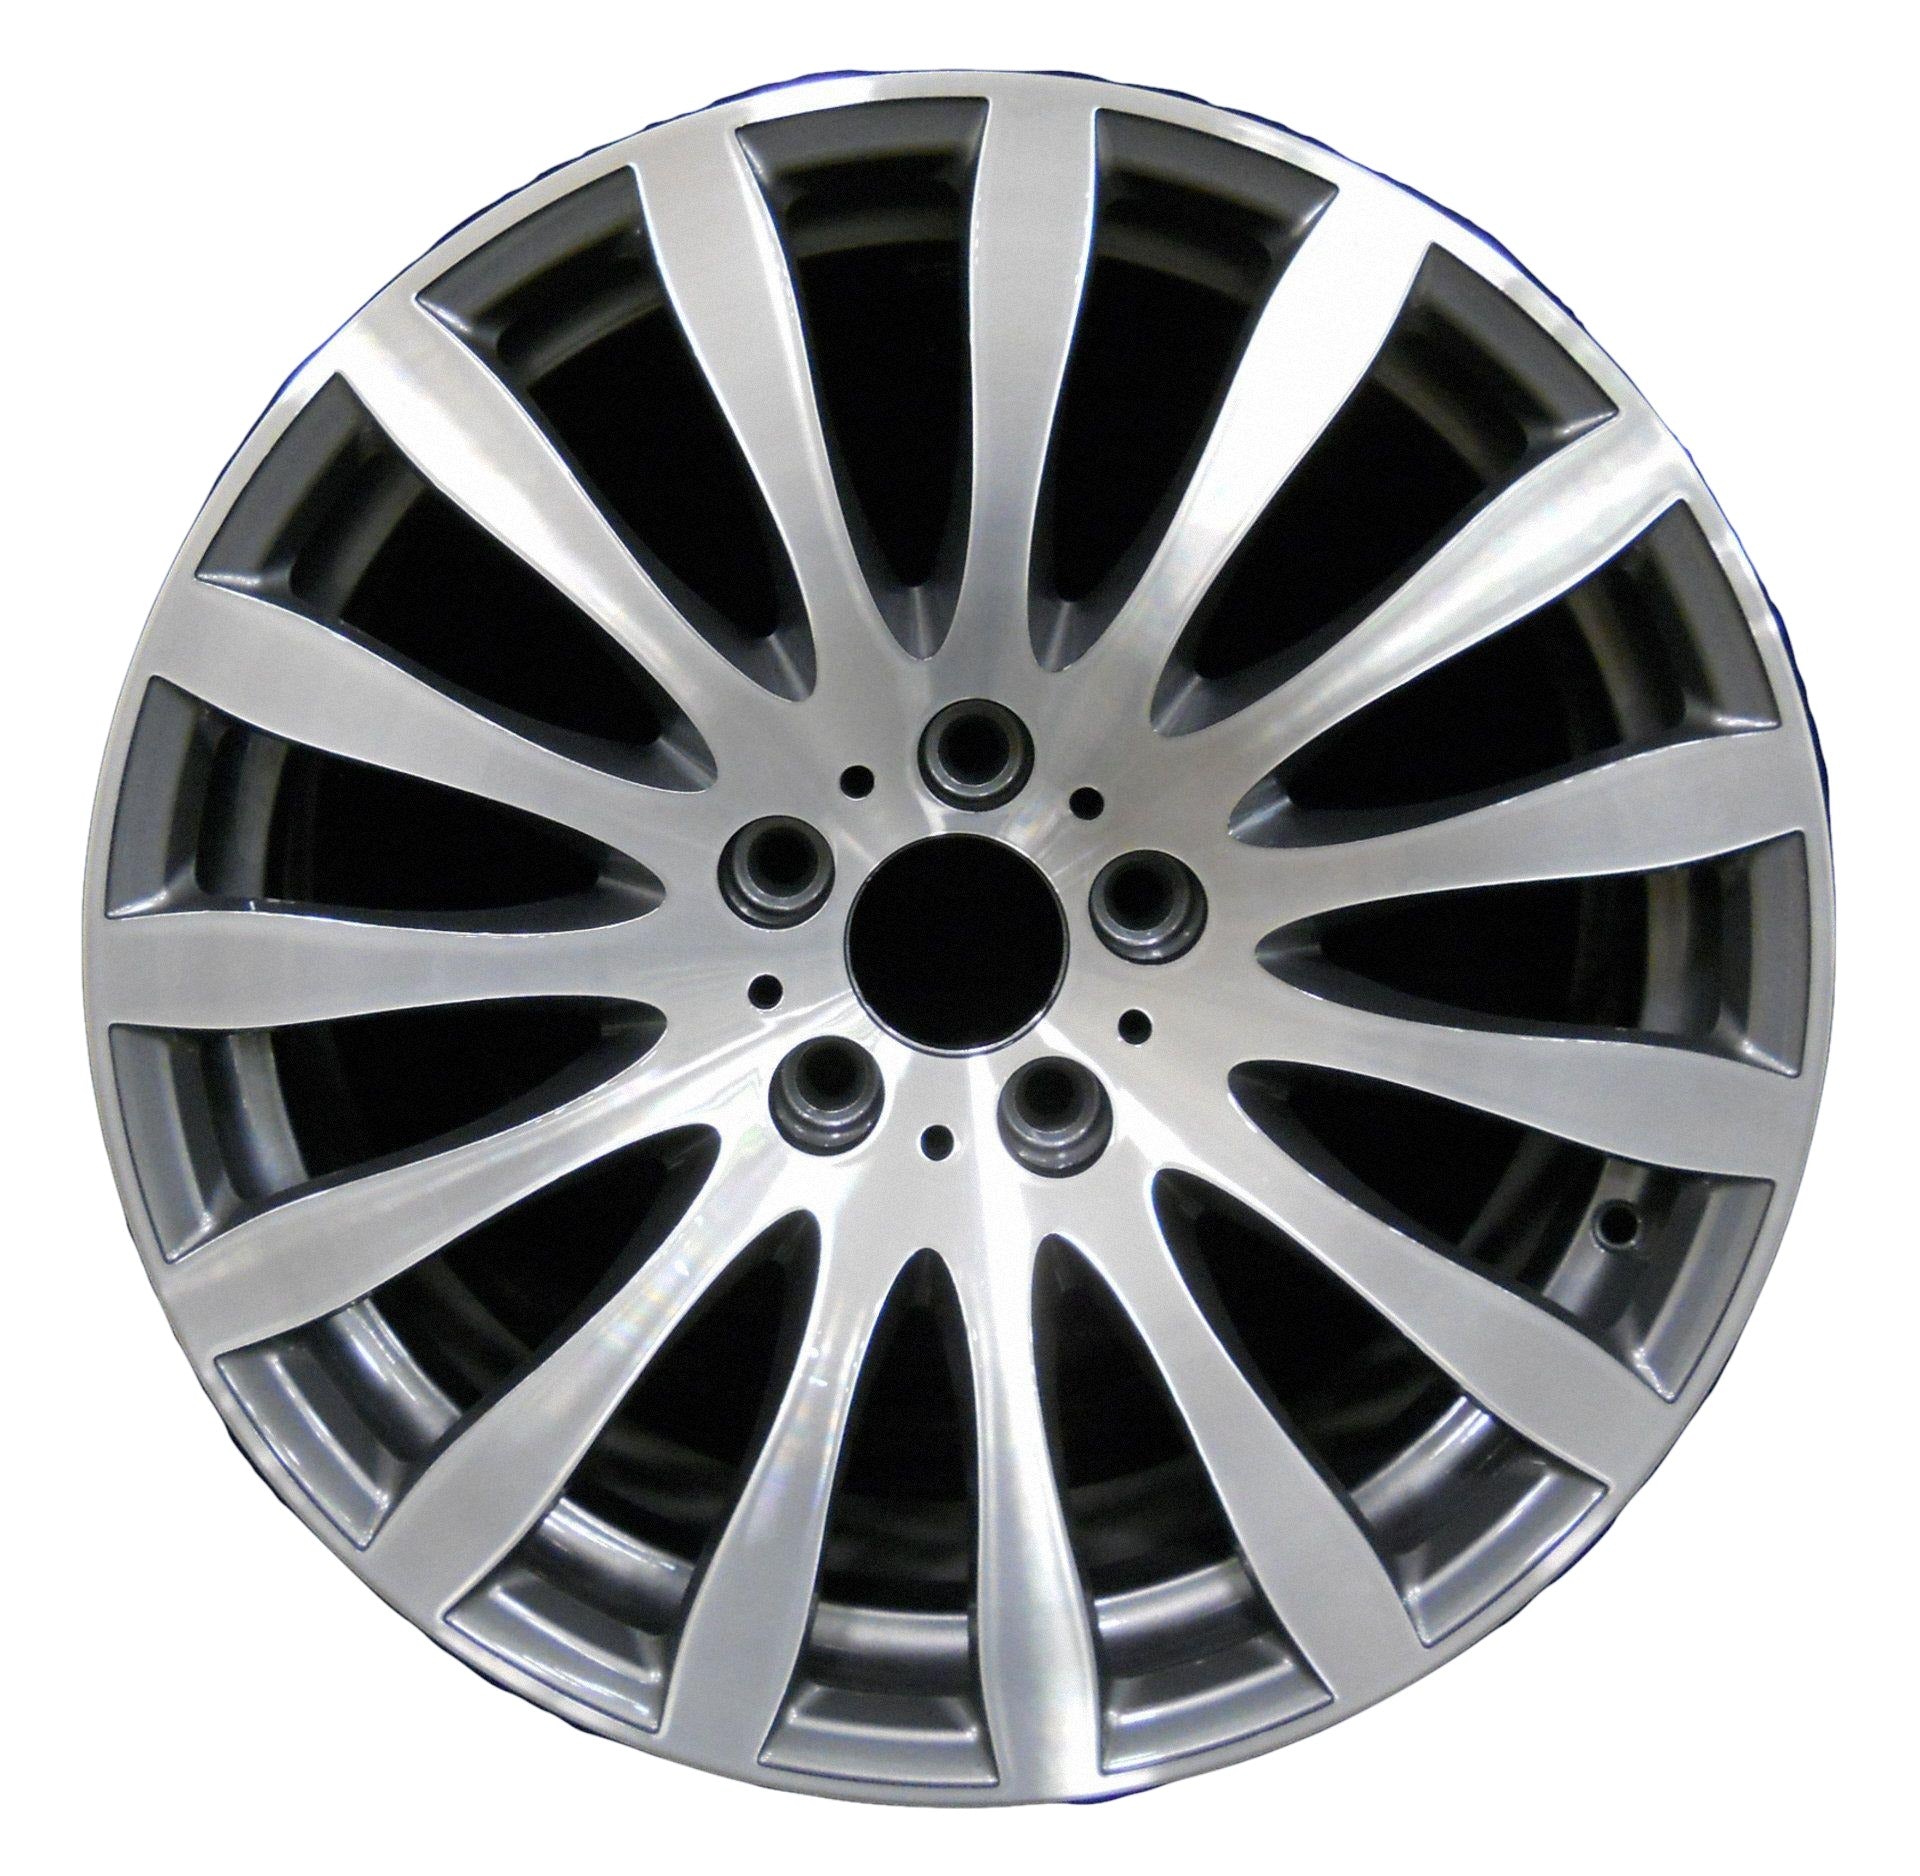 BMW 335i  2007, 2008, 2009, 2010, 2011, 2012, 2013 Factory OEM Car Wheel Size 19x9 Alloy WAO.59627RE.LC37.MABRT